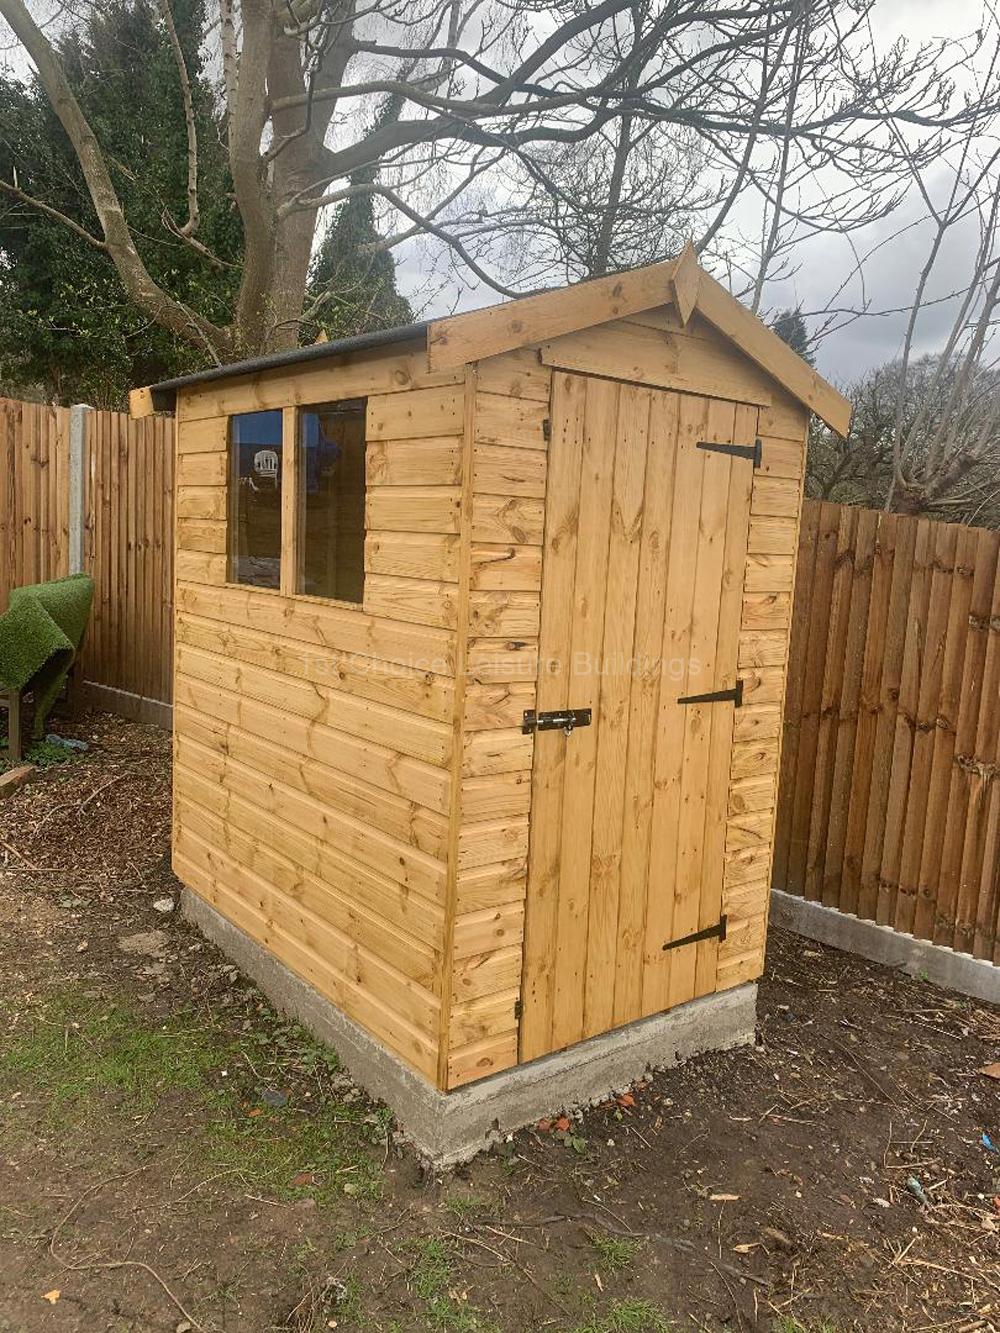 1st Choice Diamond Donnington Budget Wooden Shed - Assembled Free6